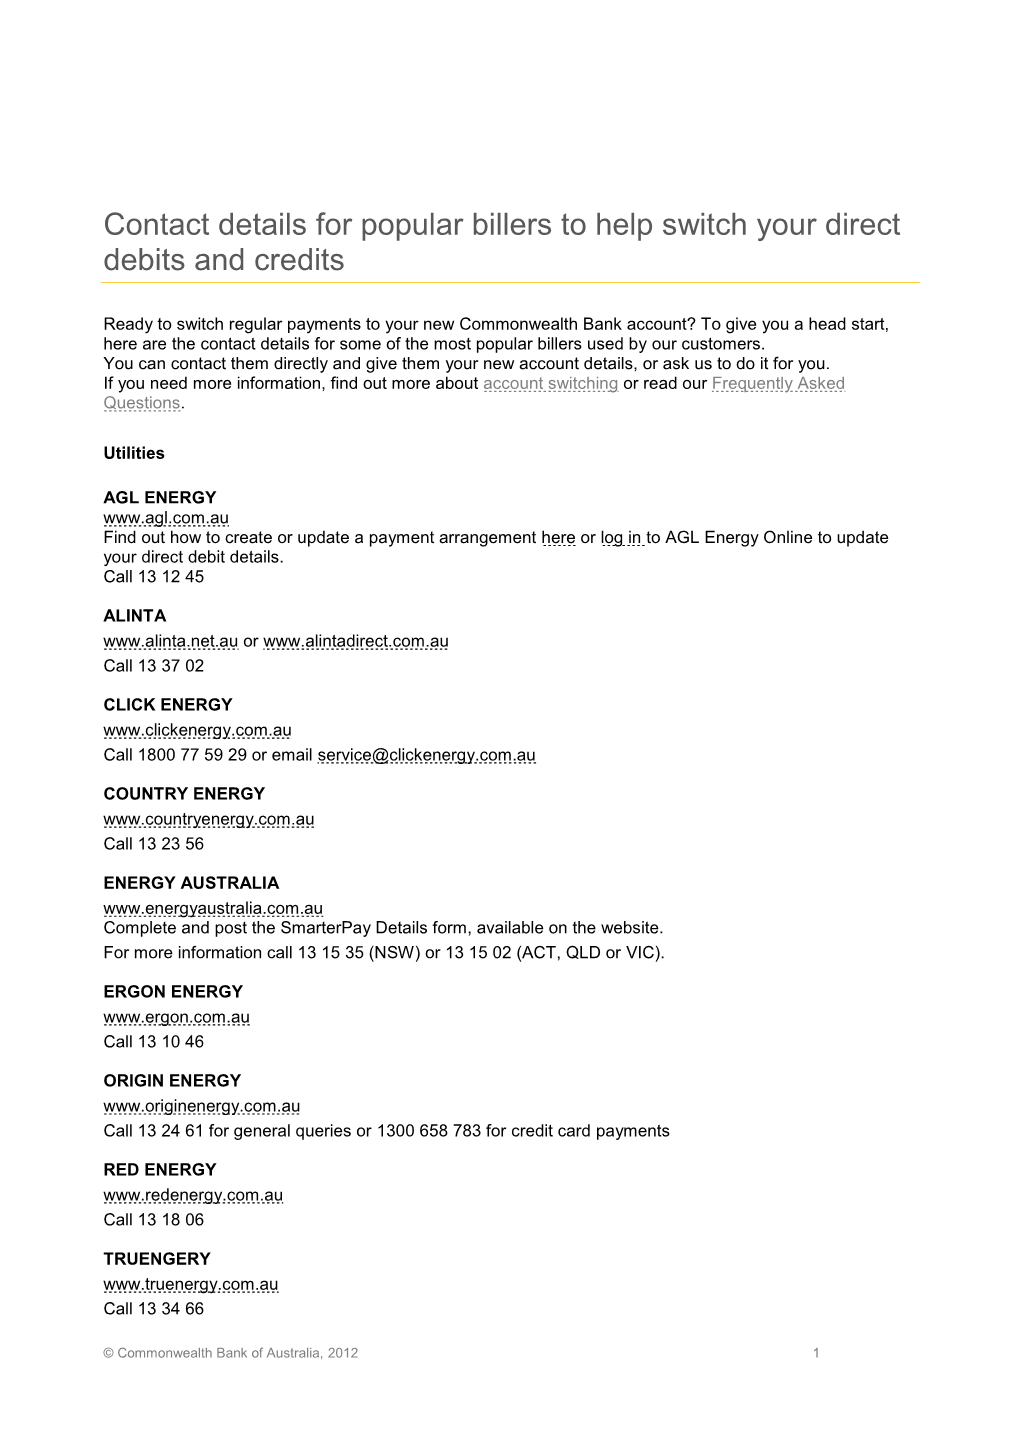 Contact Details for Popular Billers to Help Switch Your Direct Debits and Credits